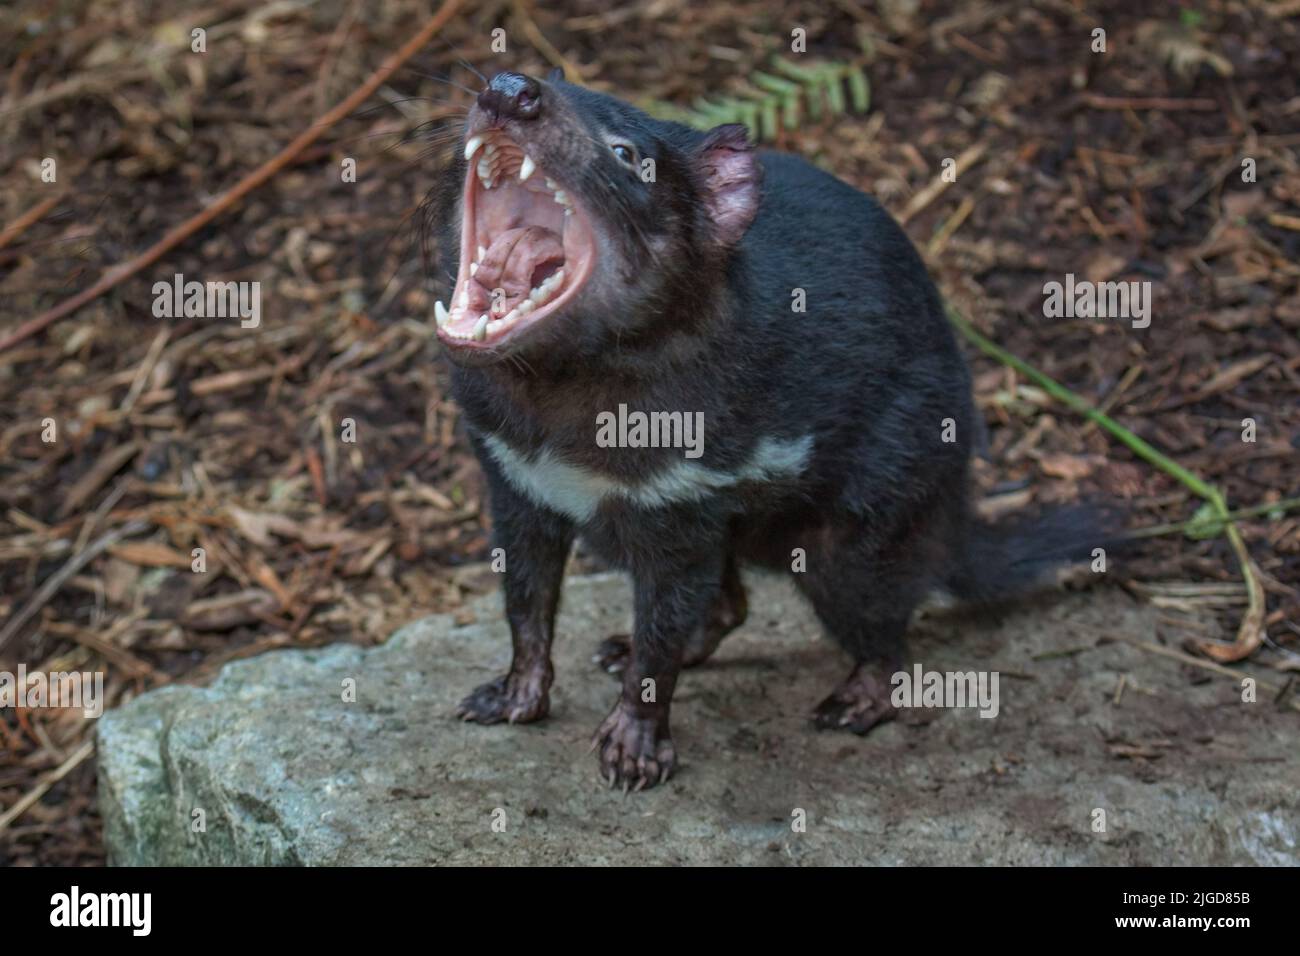 Tasmanian Devil (Sarcophilus harrisii) looking up with mouth wide open, displaying teeth and tongue, in aggressive mood. Stock Photo